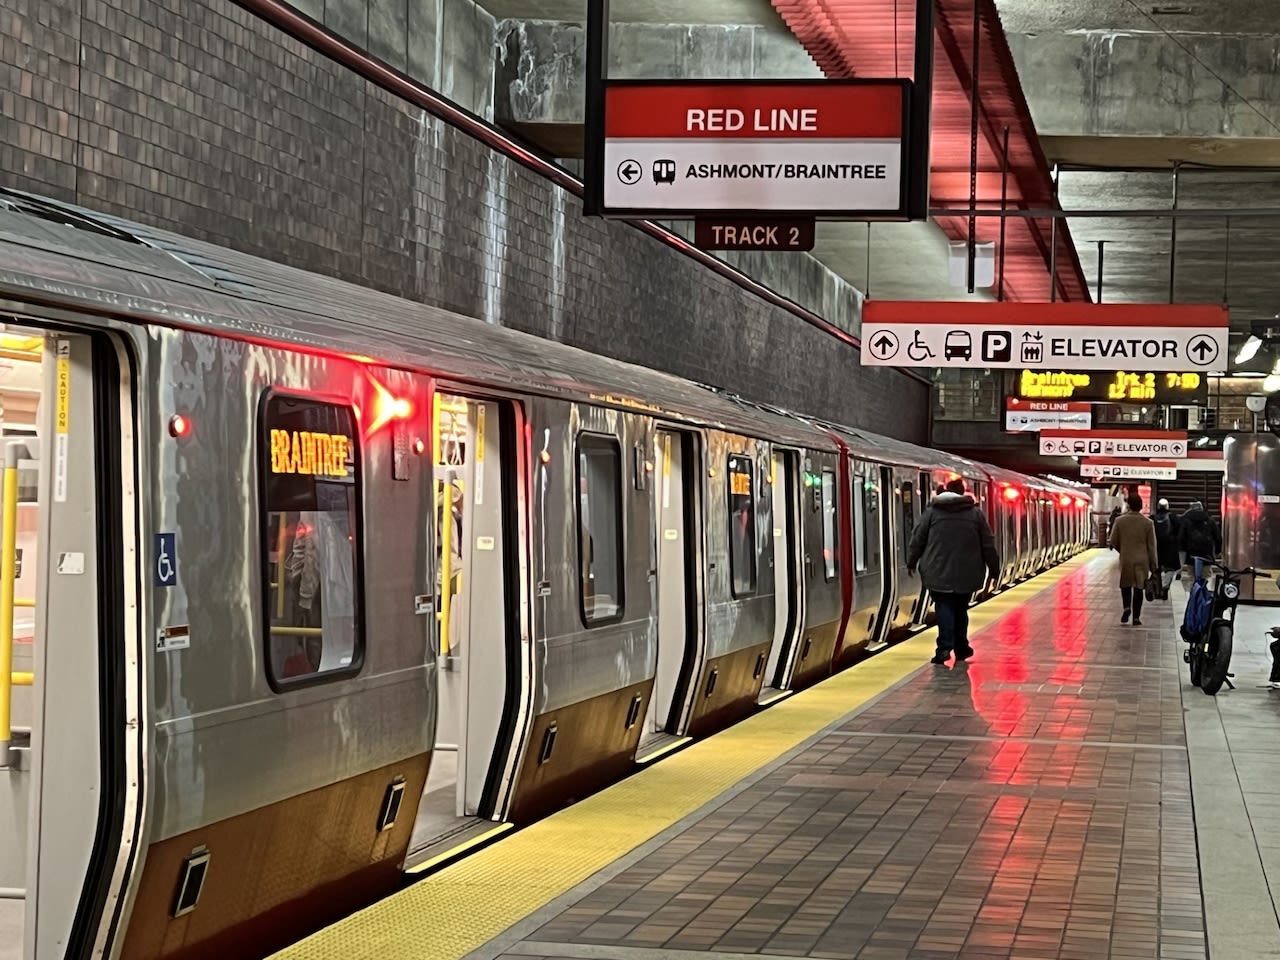 Part of the Red Line closes Thursday. Here's how to get around without it.